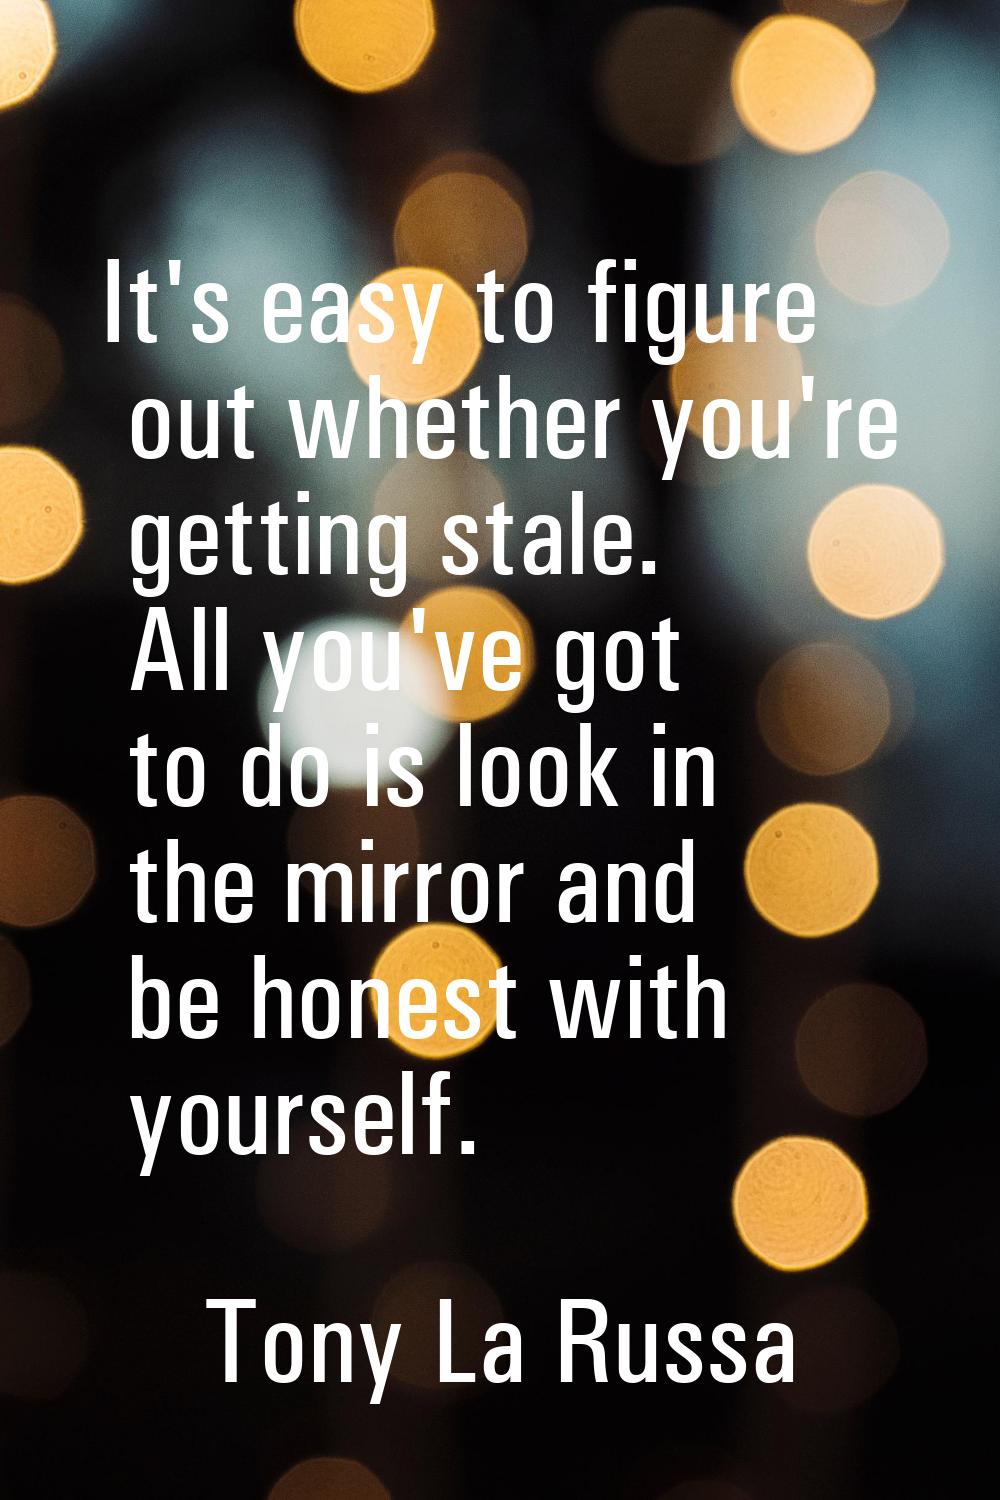 It's easy to figure out whether you're getting stale. All you've got to do is look in the mirror an